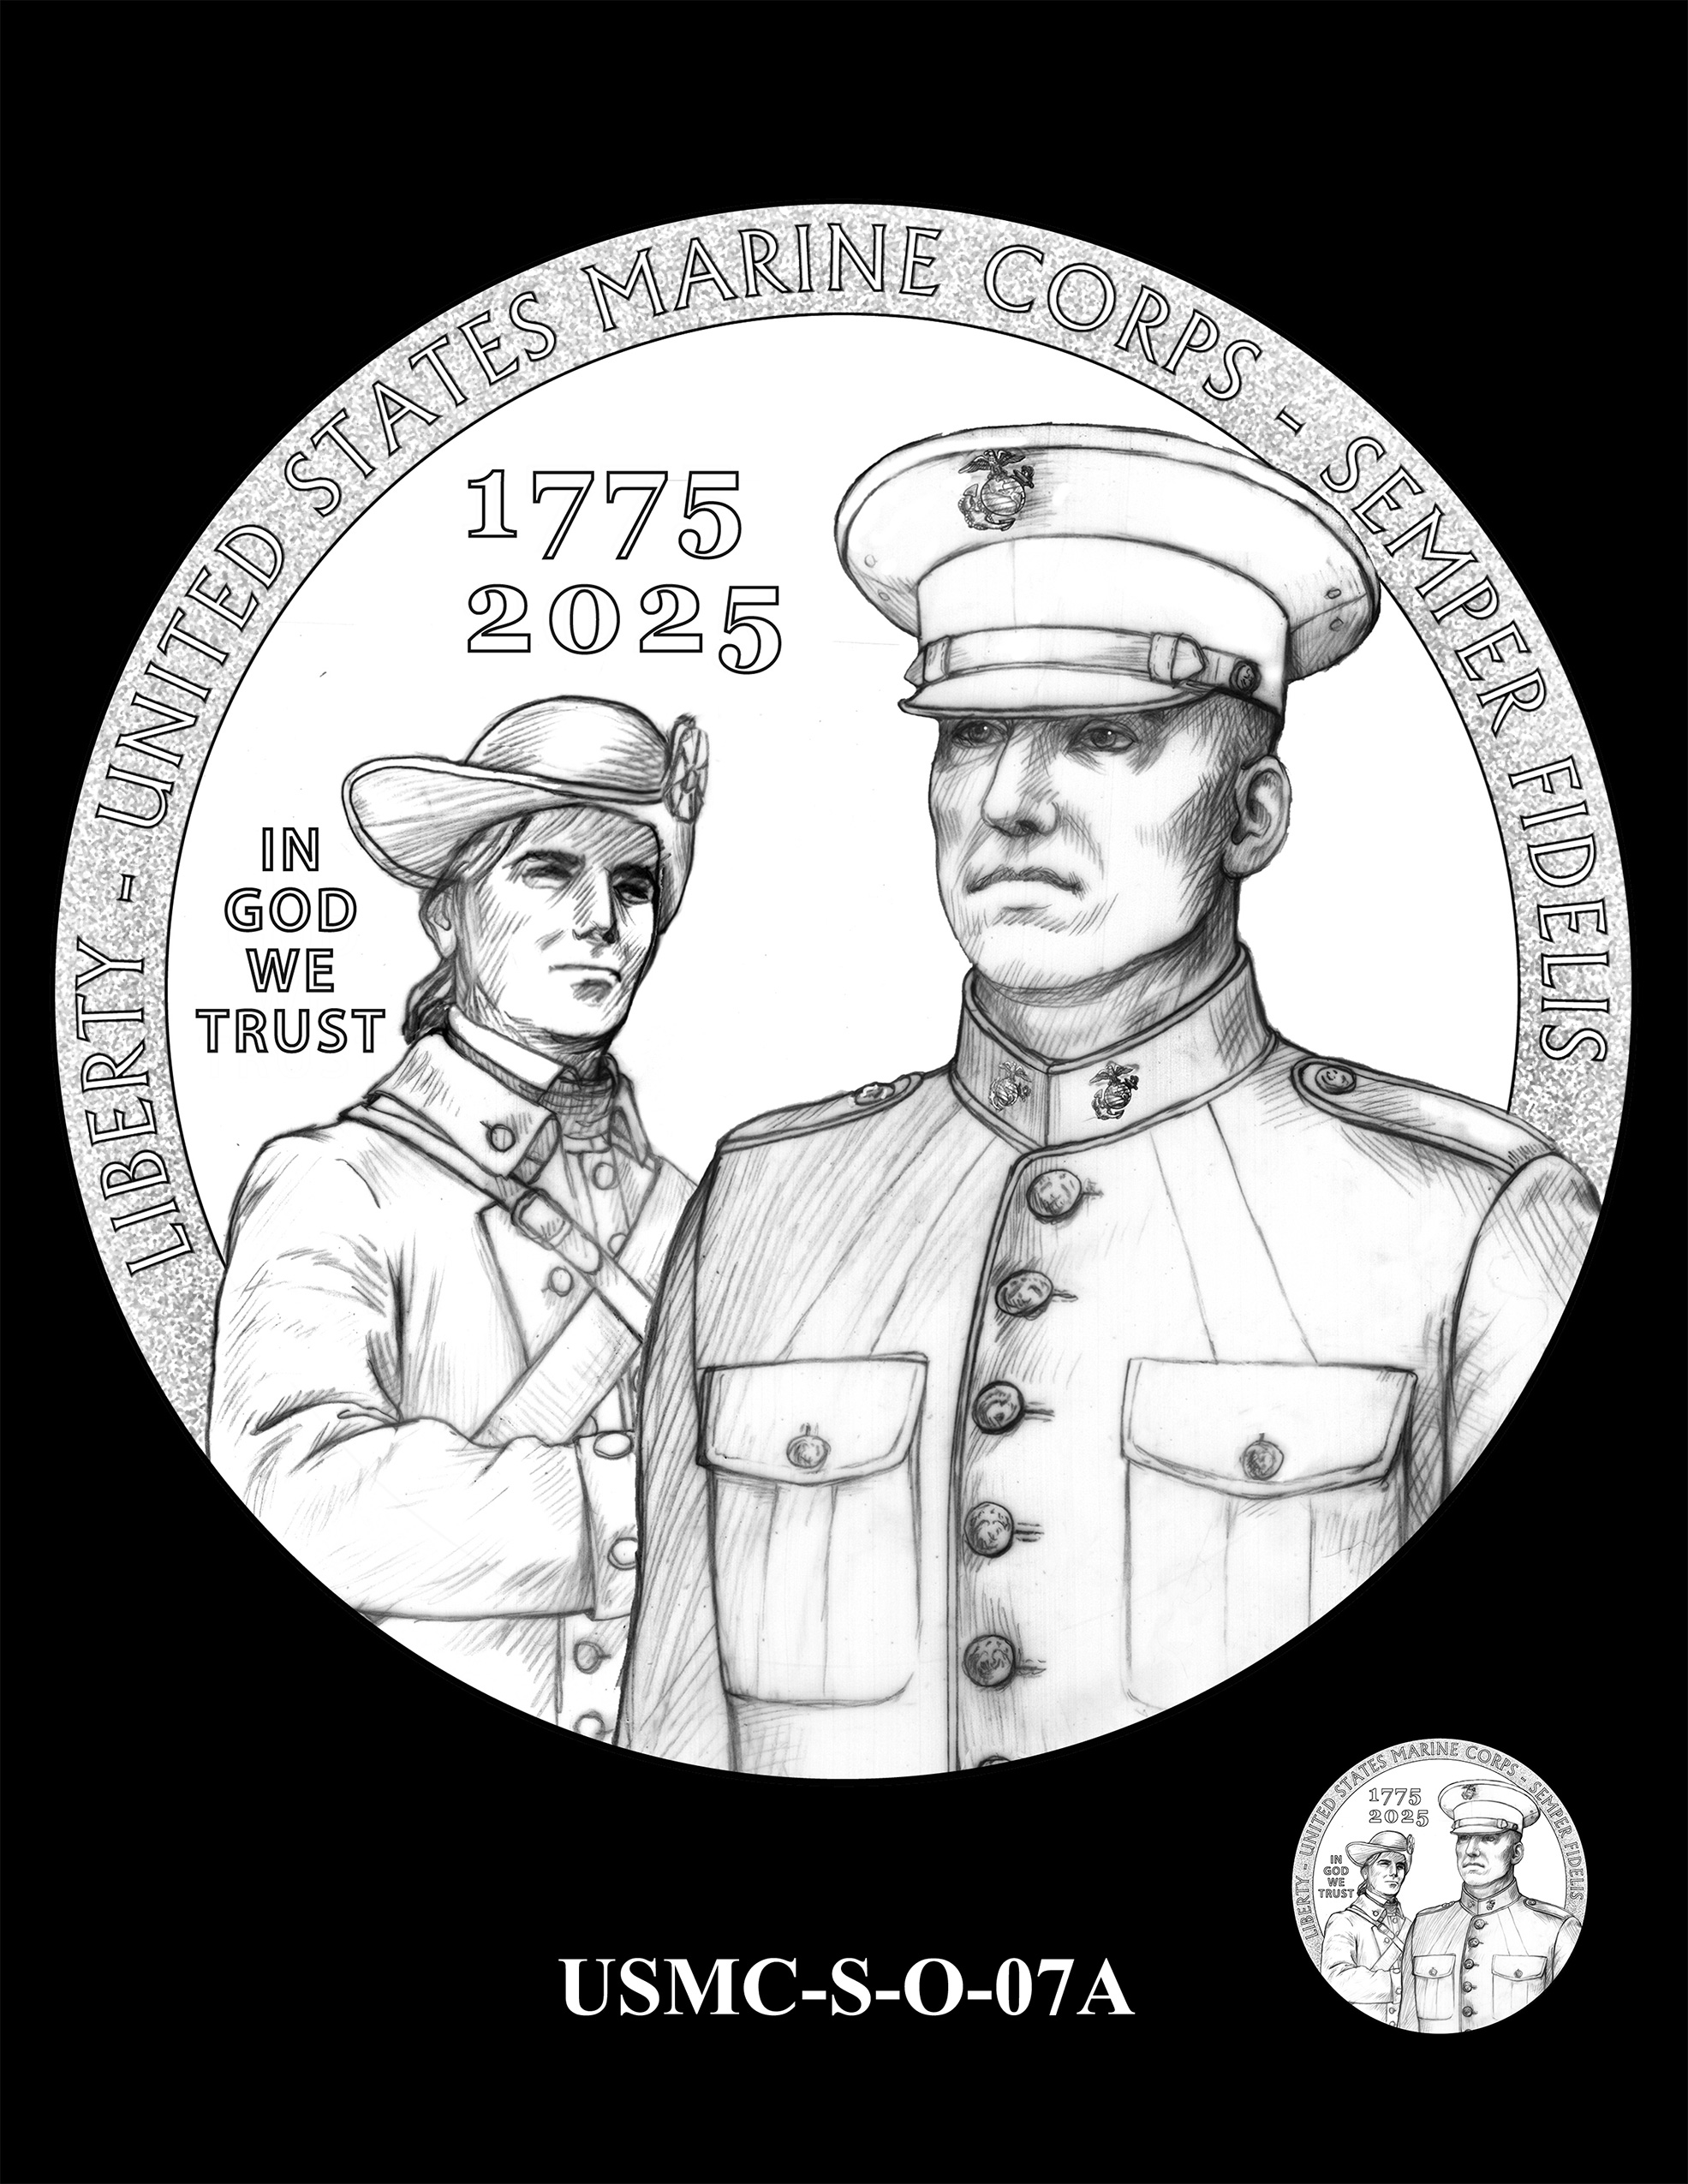 USMC-S-O-07A -- 250th Anniversary of the United States Marine Corps - Silver